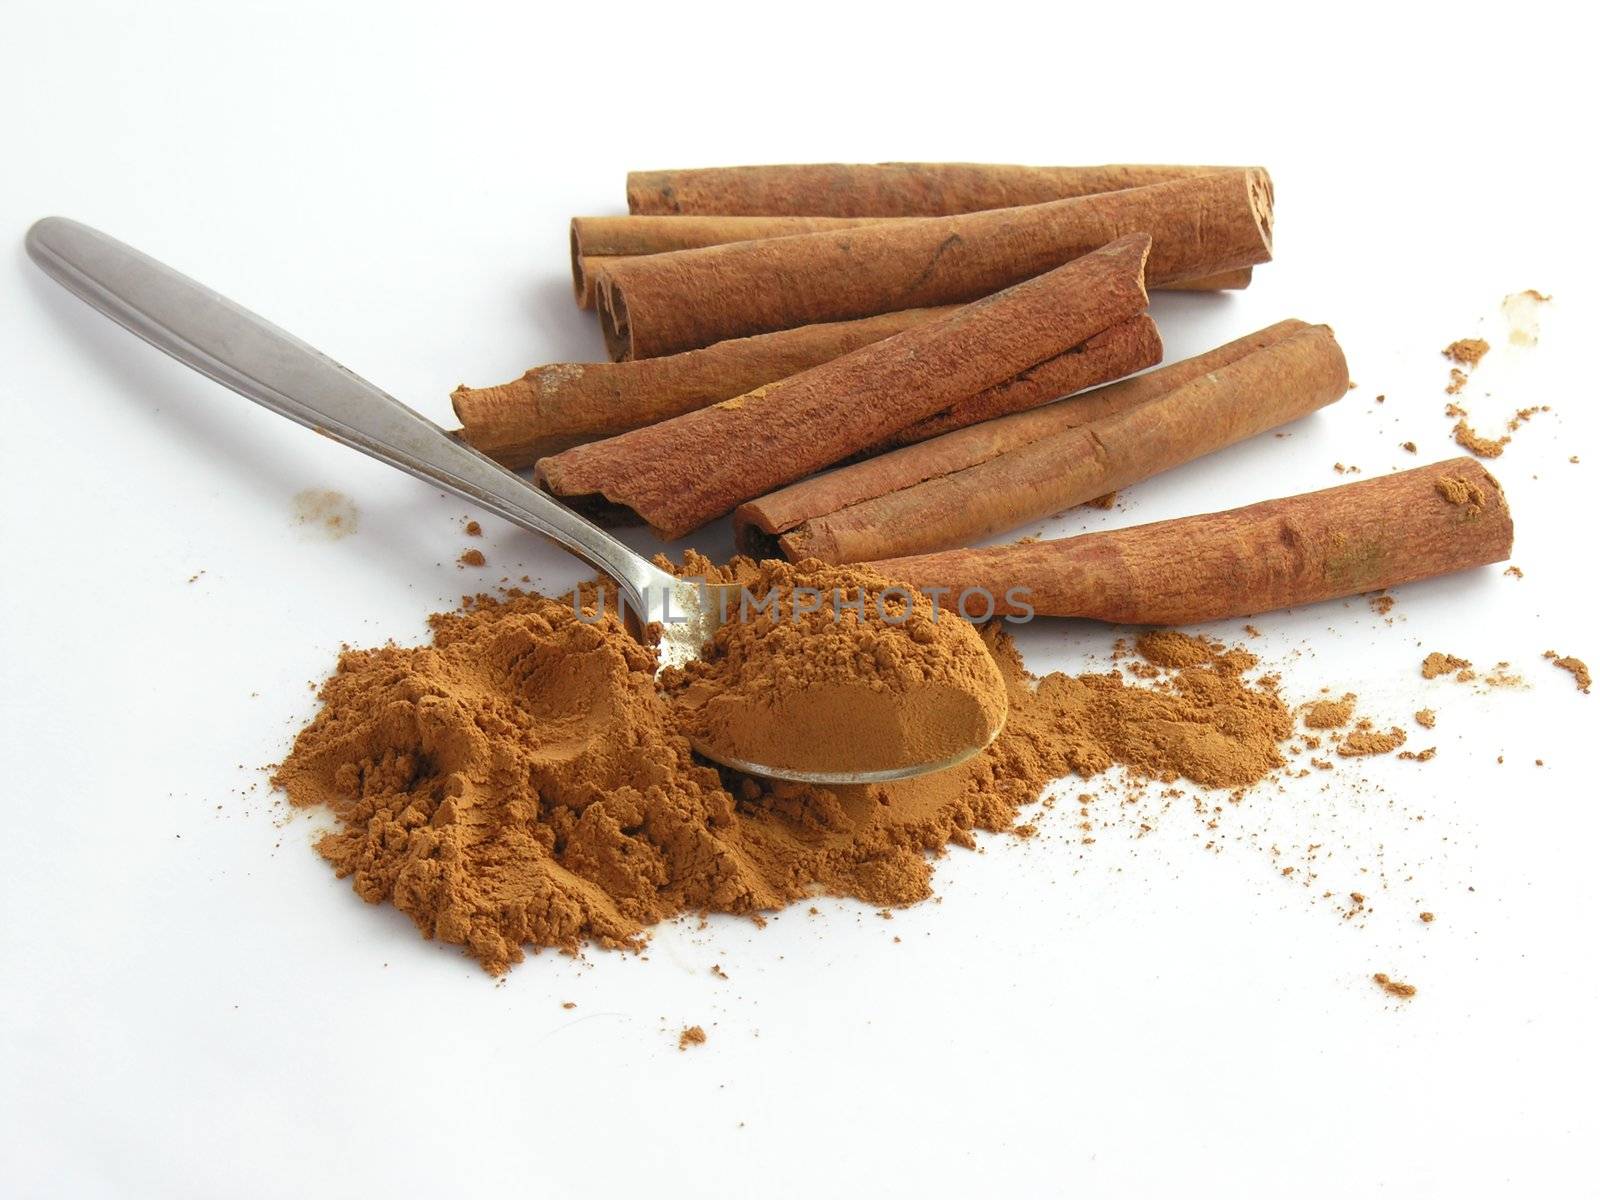 tast and aroma of cinnamon useful in cooking and baking